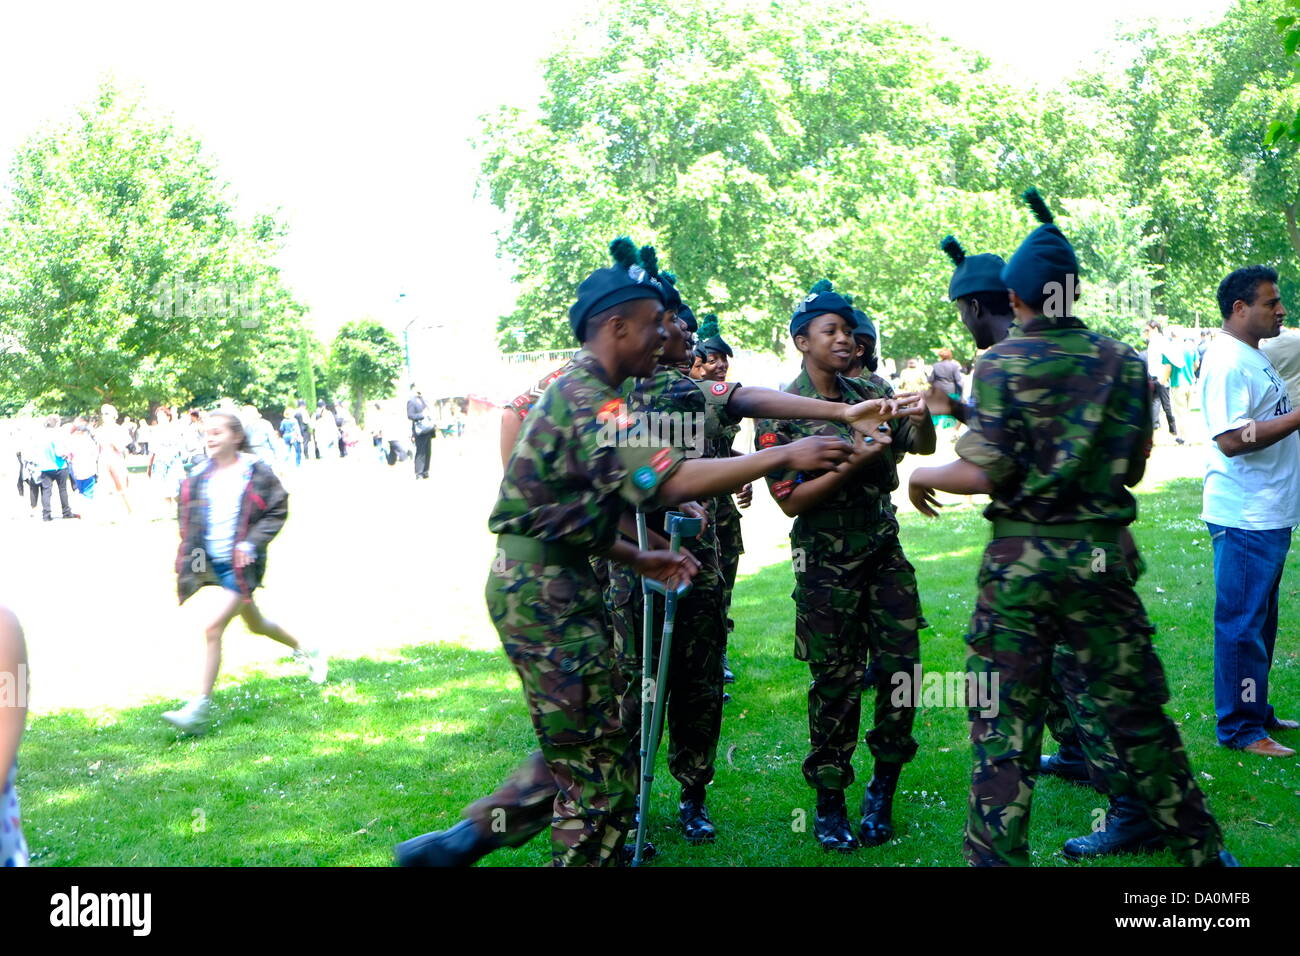 London, UK. 30th June, 2013. Armed Services day event held at the Imperial War Museum in the London Borough of Southwark The event was held on Sunday due to Pride event held on Saturday. Credit:  Rachel Megawhat/Alamy Live News Stock Photo